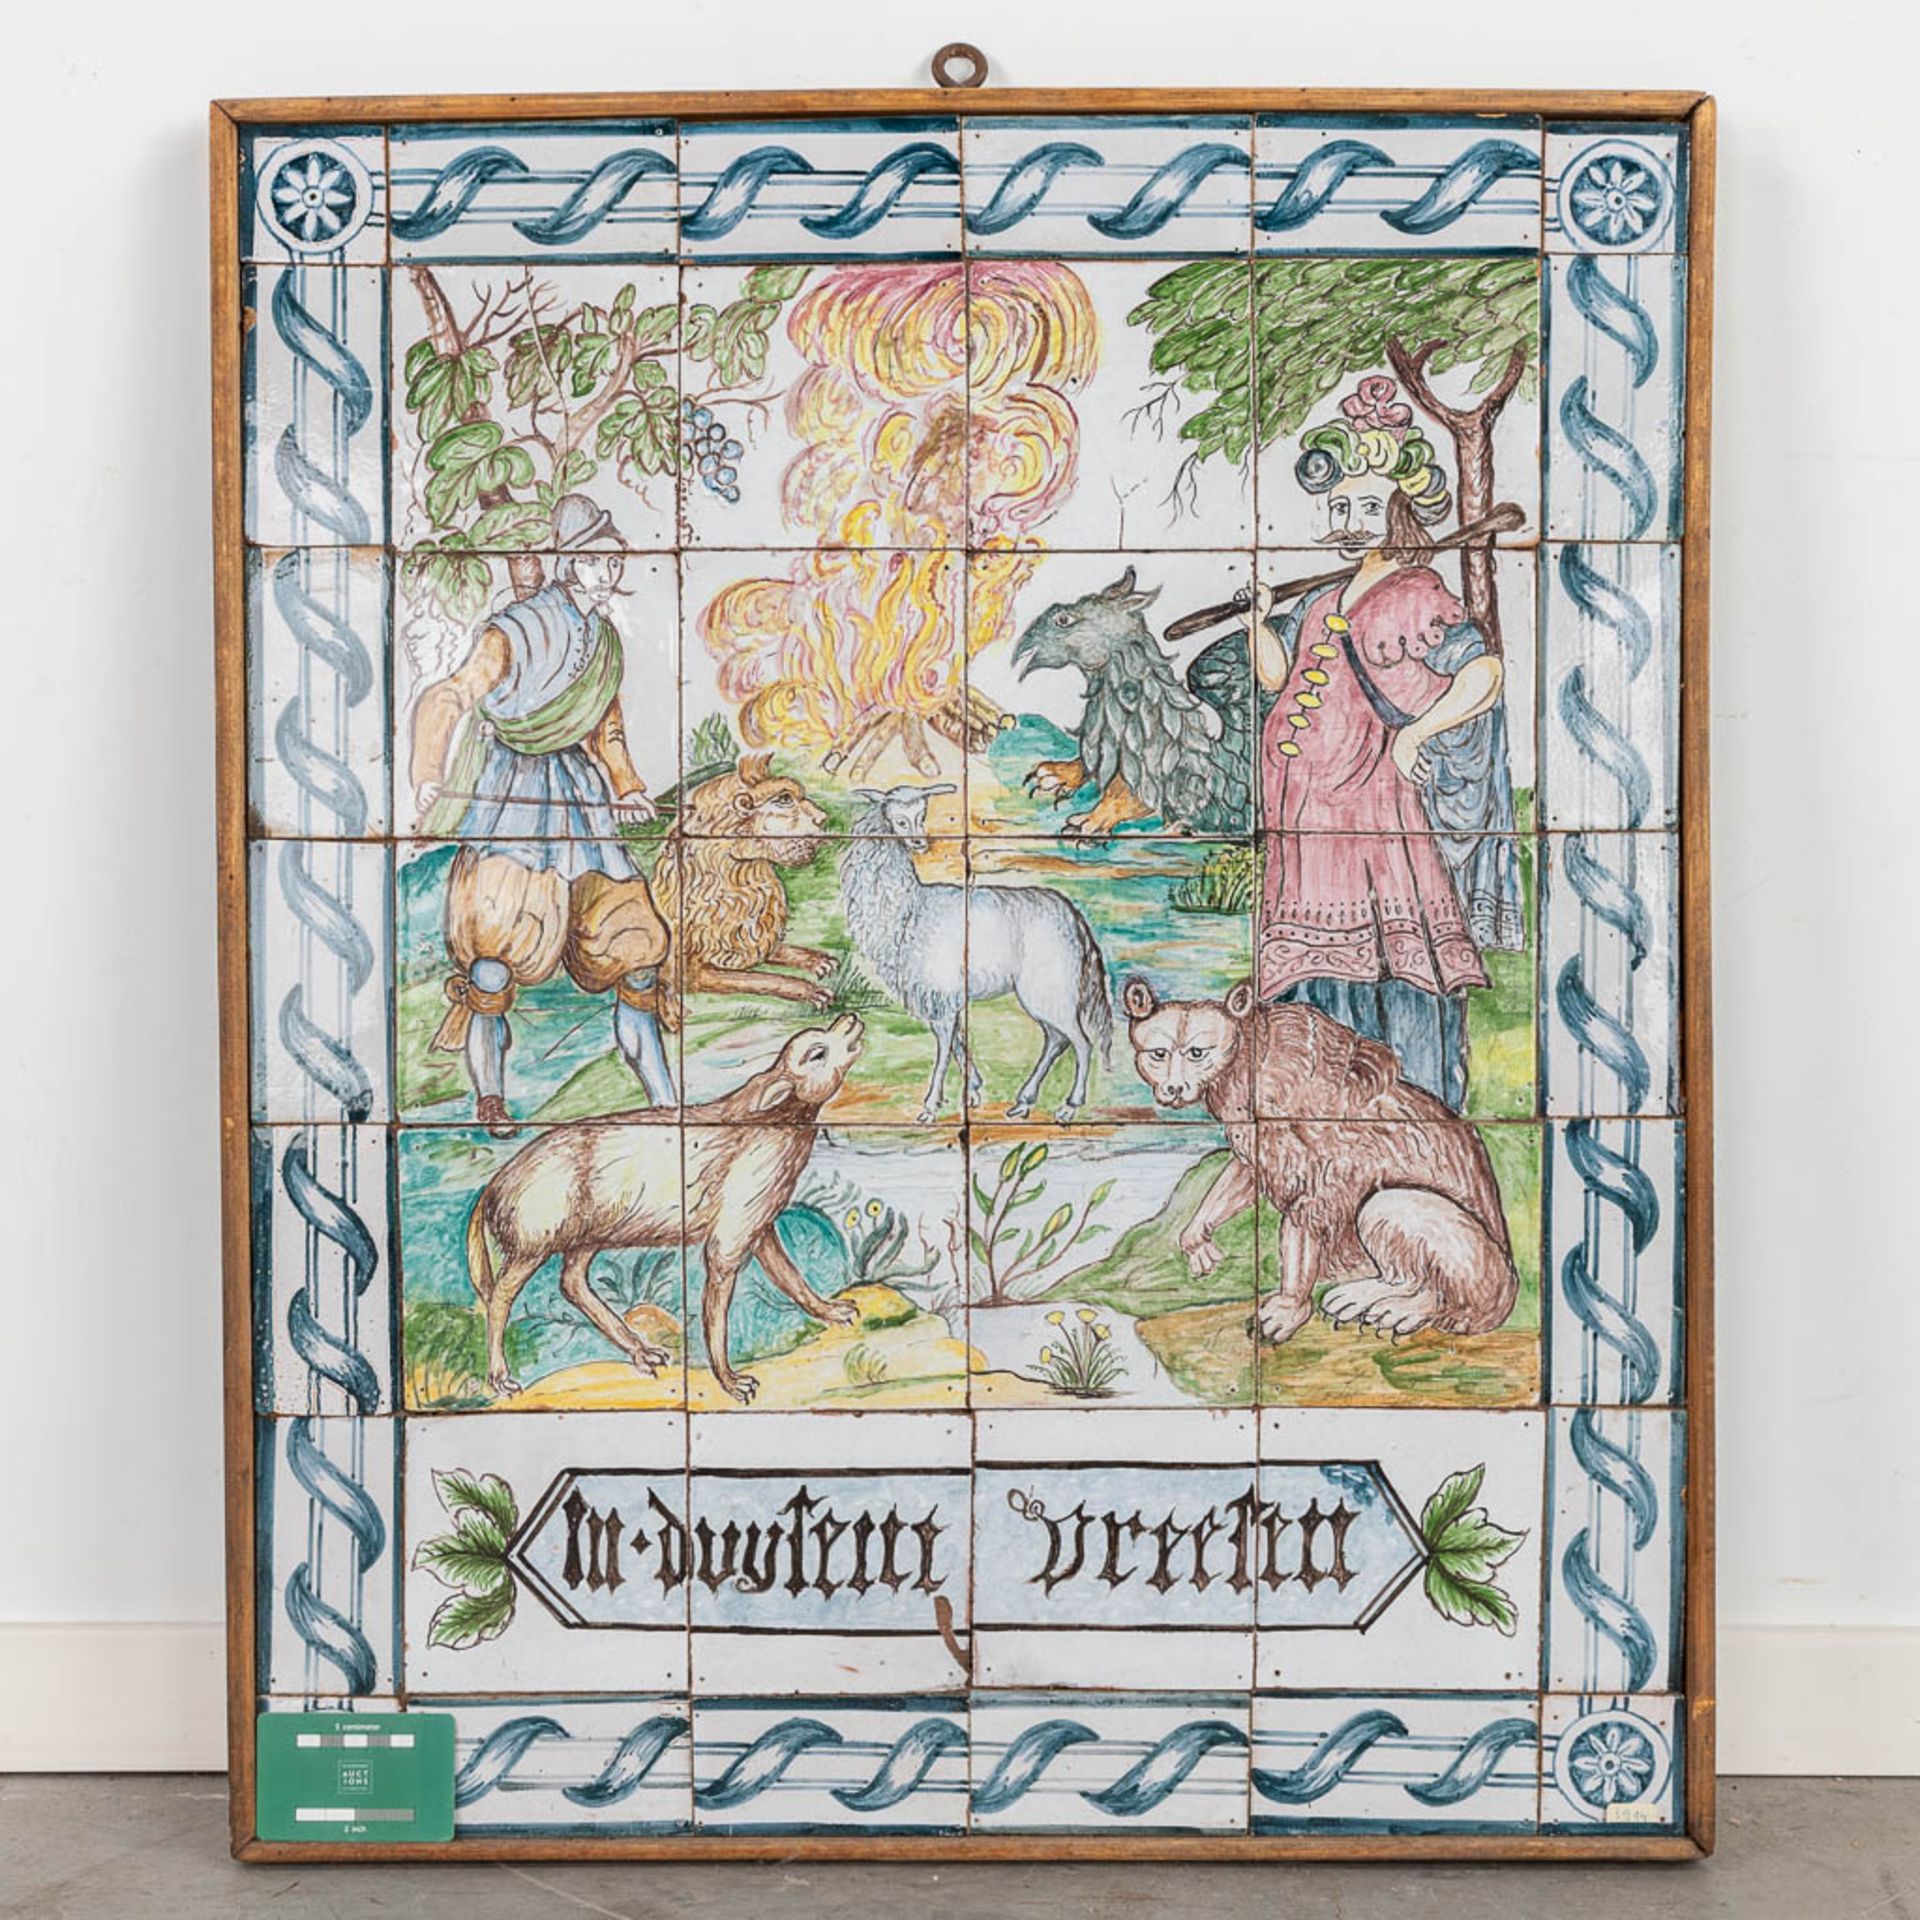 J. Aalmins, Rotterdam, An antique tile painting, polychrome tiles decor of animals and figurines. 19 - Image 2 of 7